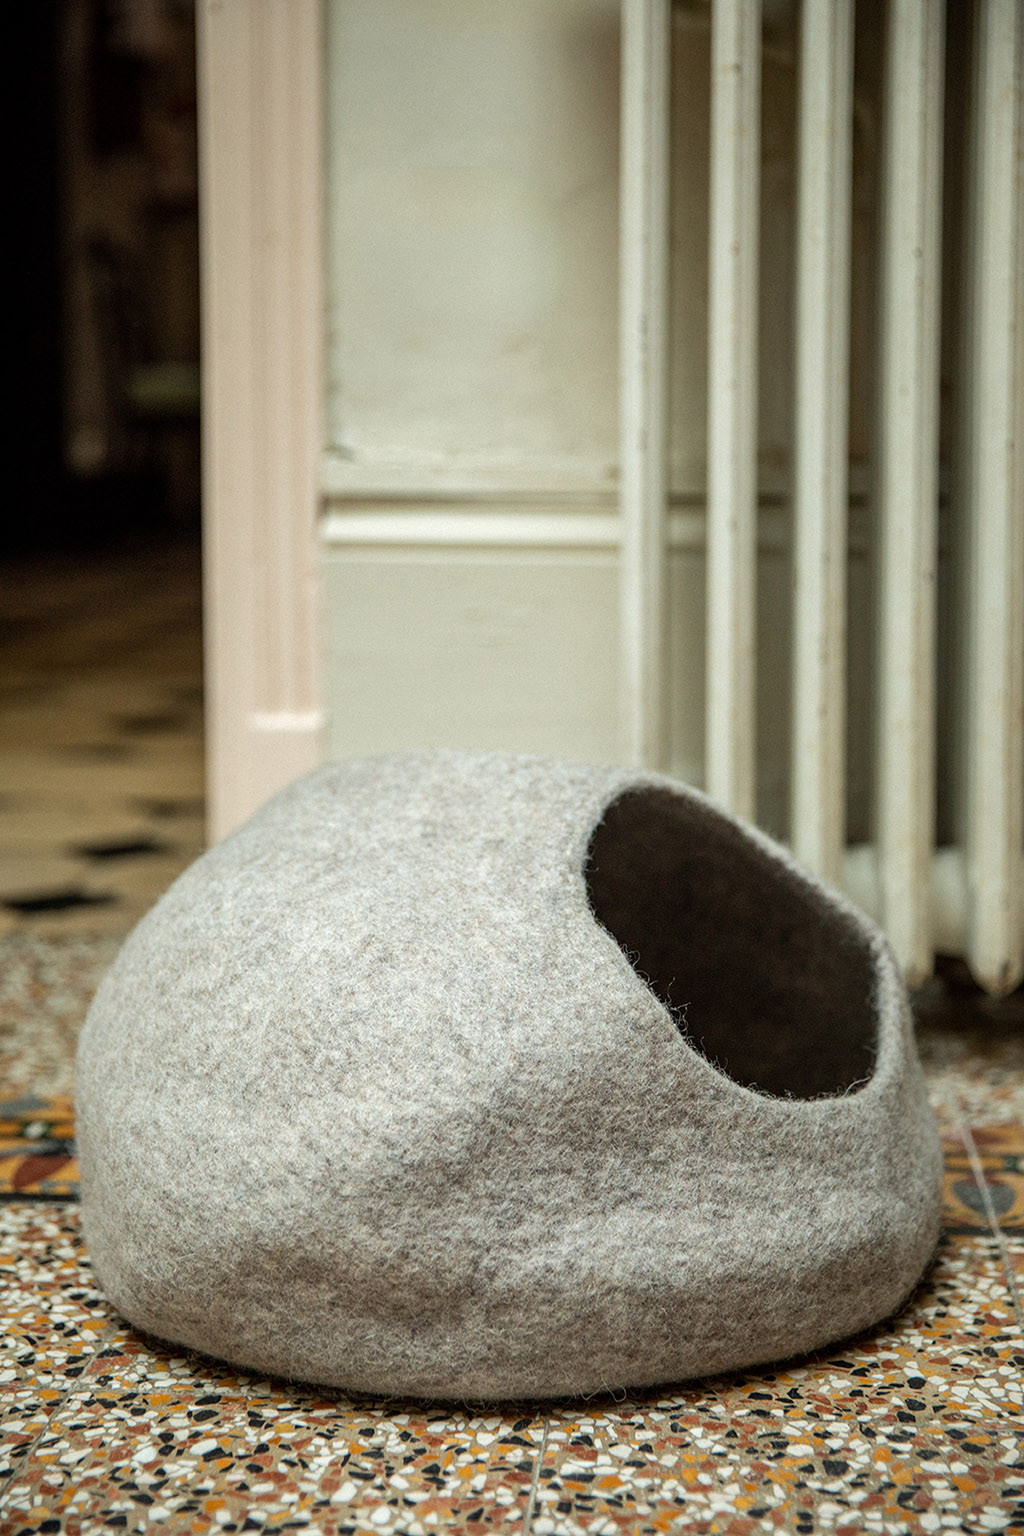 the organic shape of this felt cat basket also decorates the living room